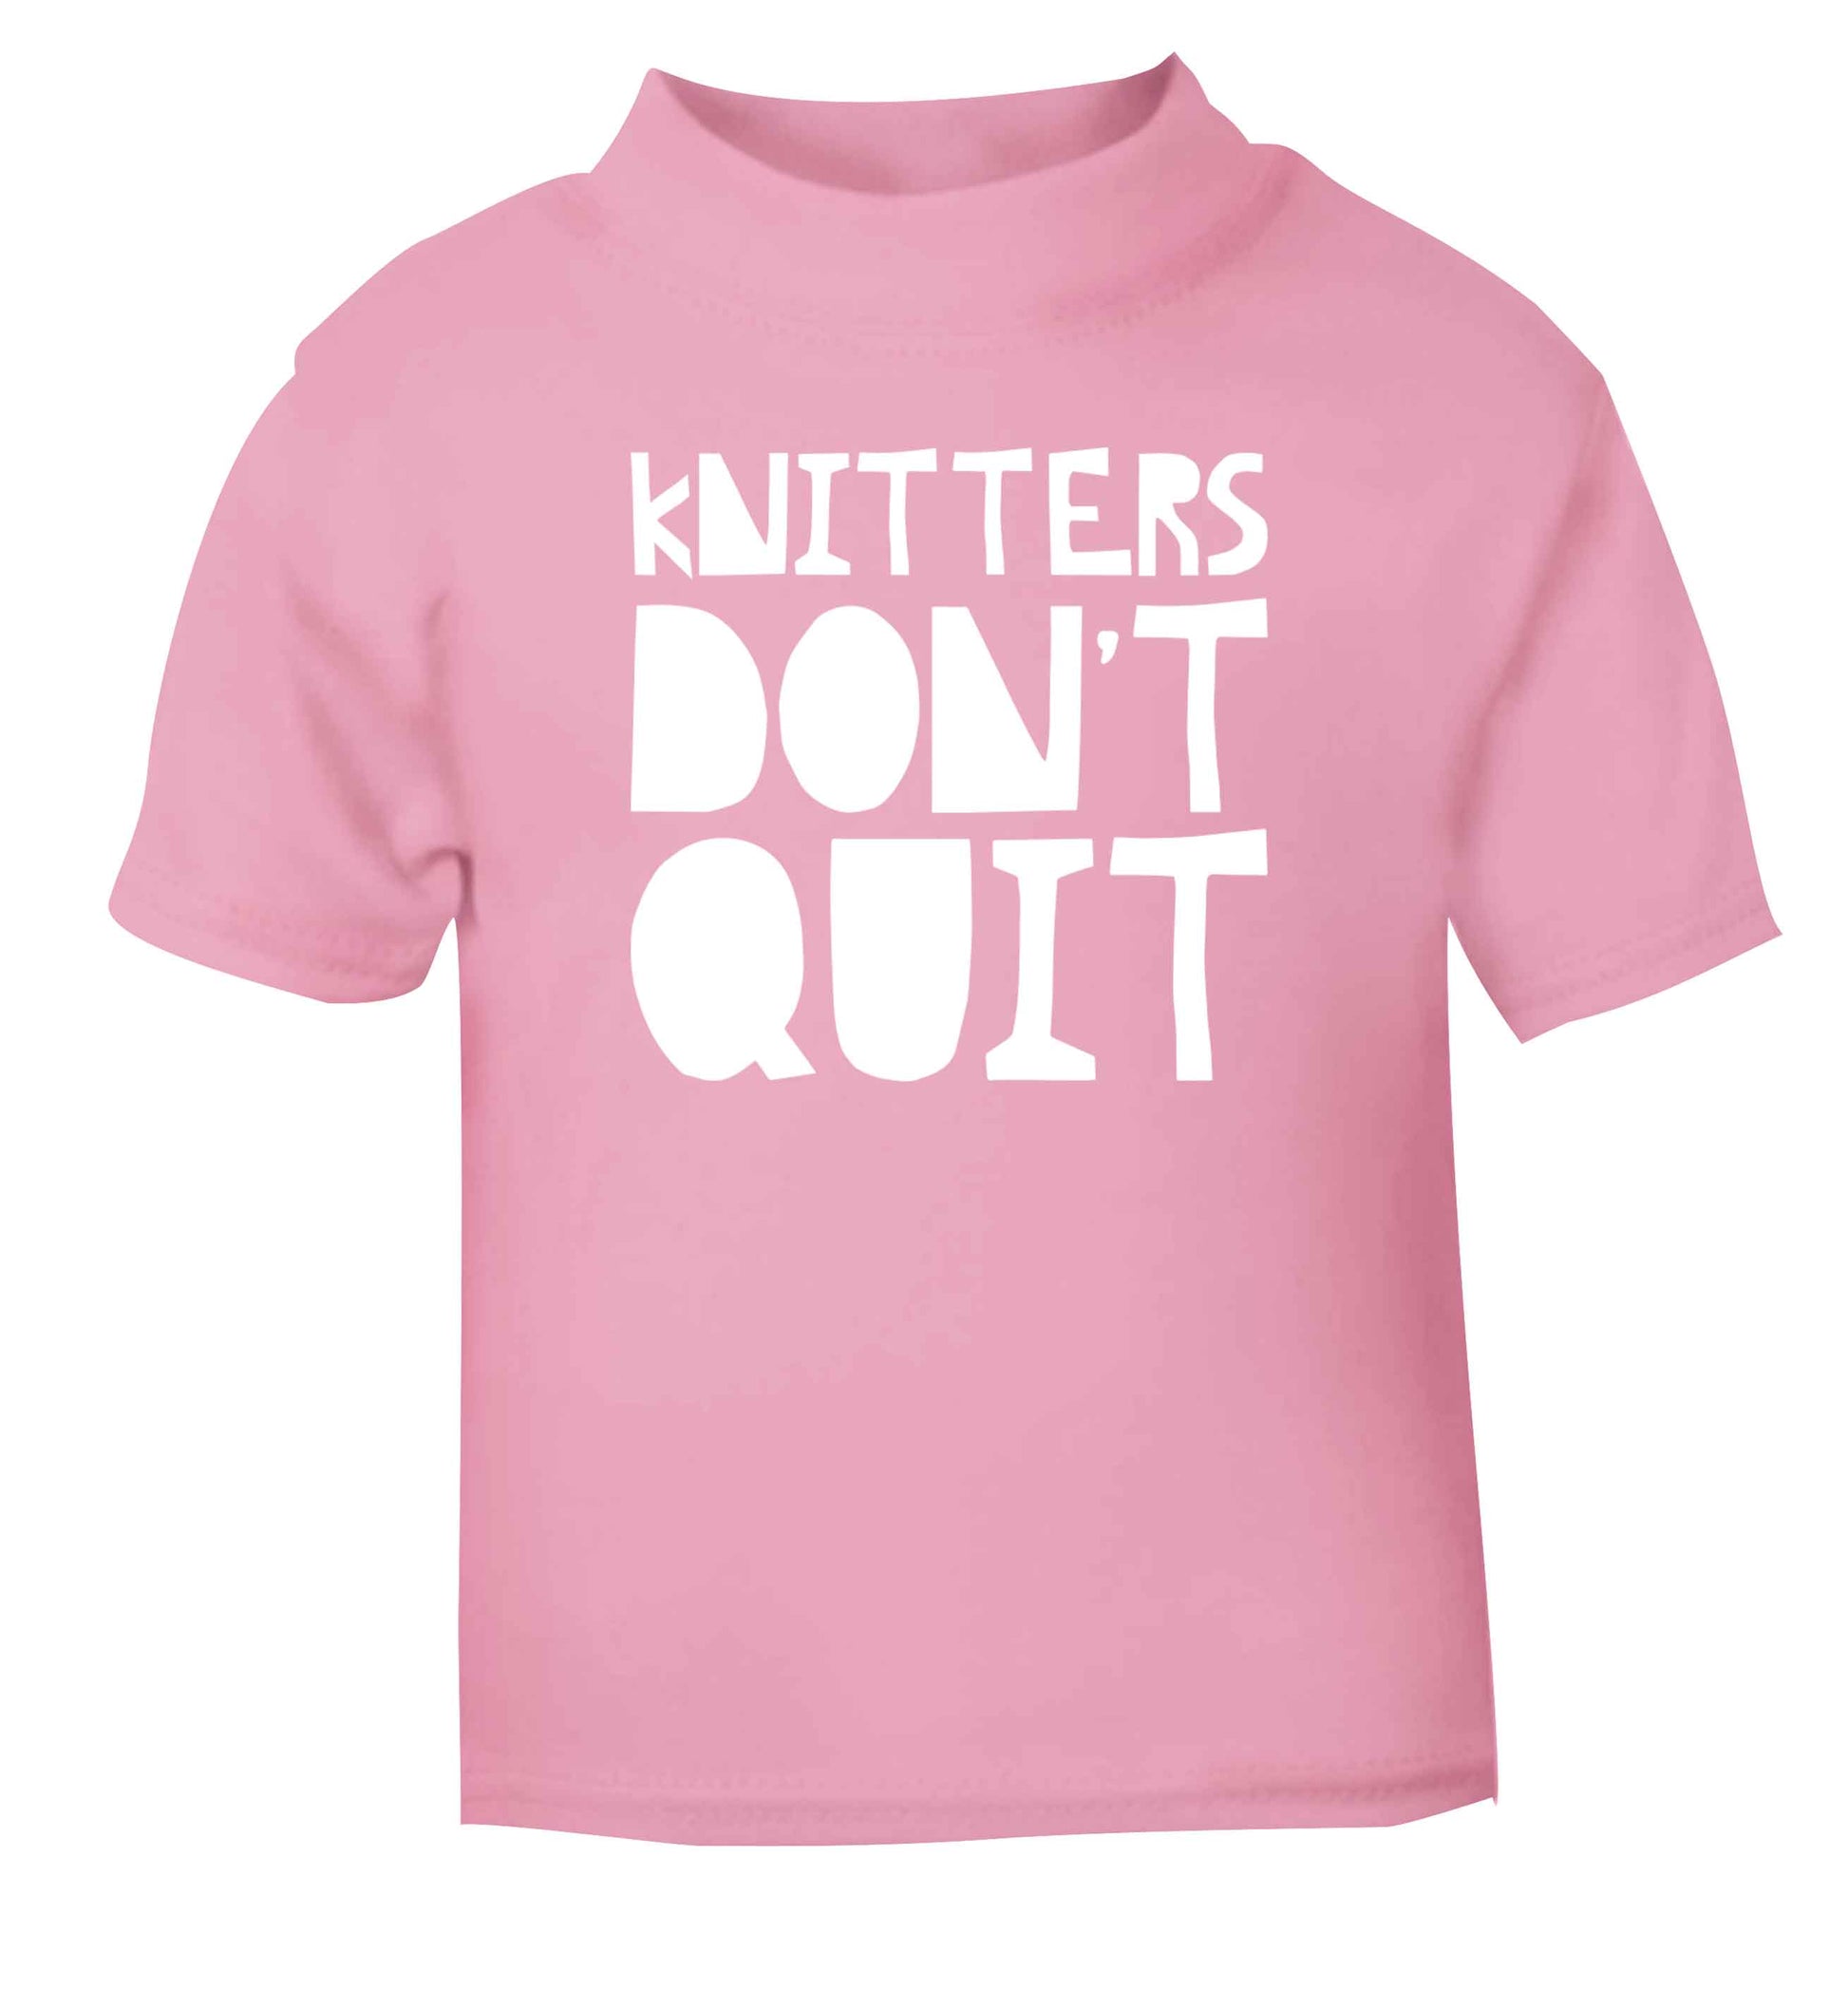 Knitters don't quit light pink Baby Toddler Tshirt 2 Years